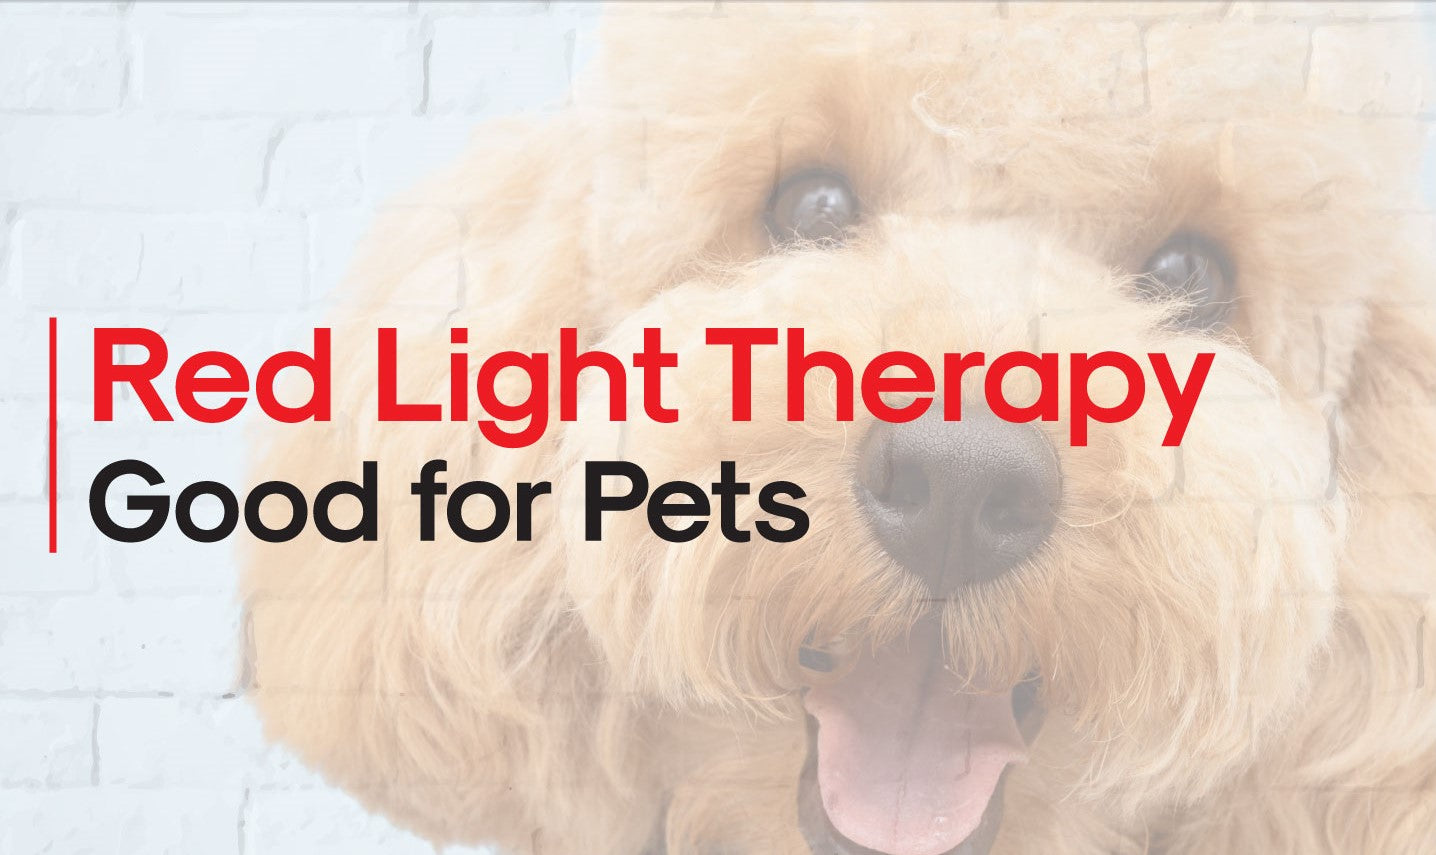 RED LIGHT THERAPY FOR DOGS, HORSES, CATS & OTHER ANIMALS – BENEFITS & VETERINARY USAGE